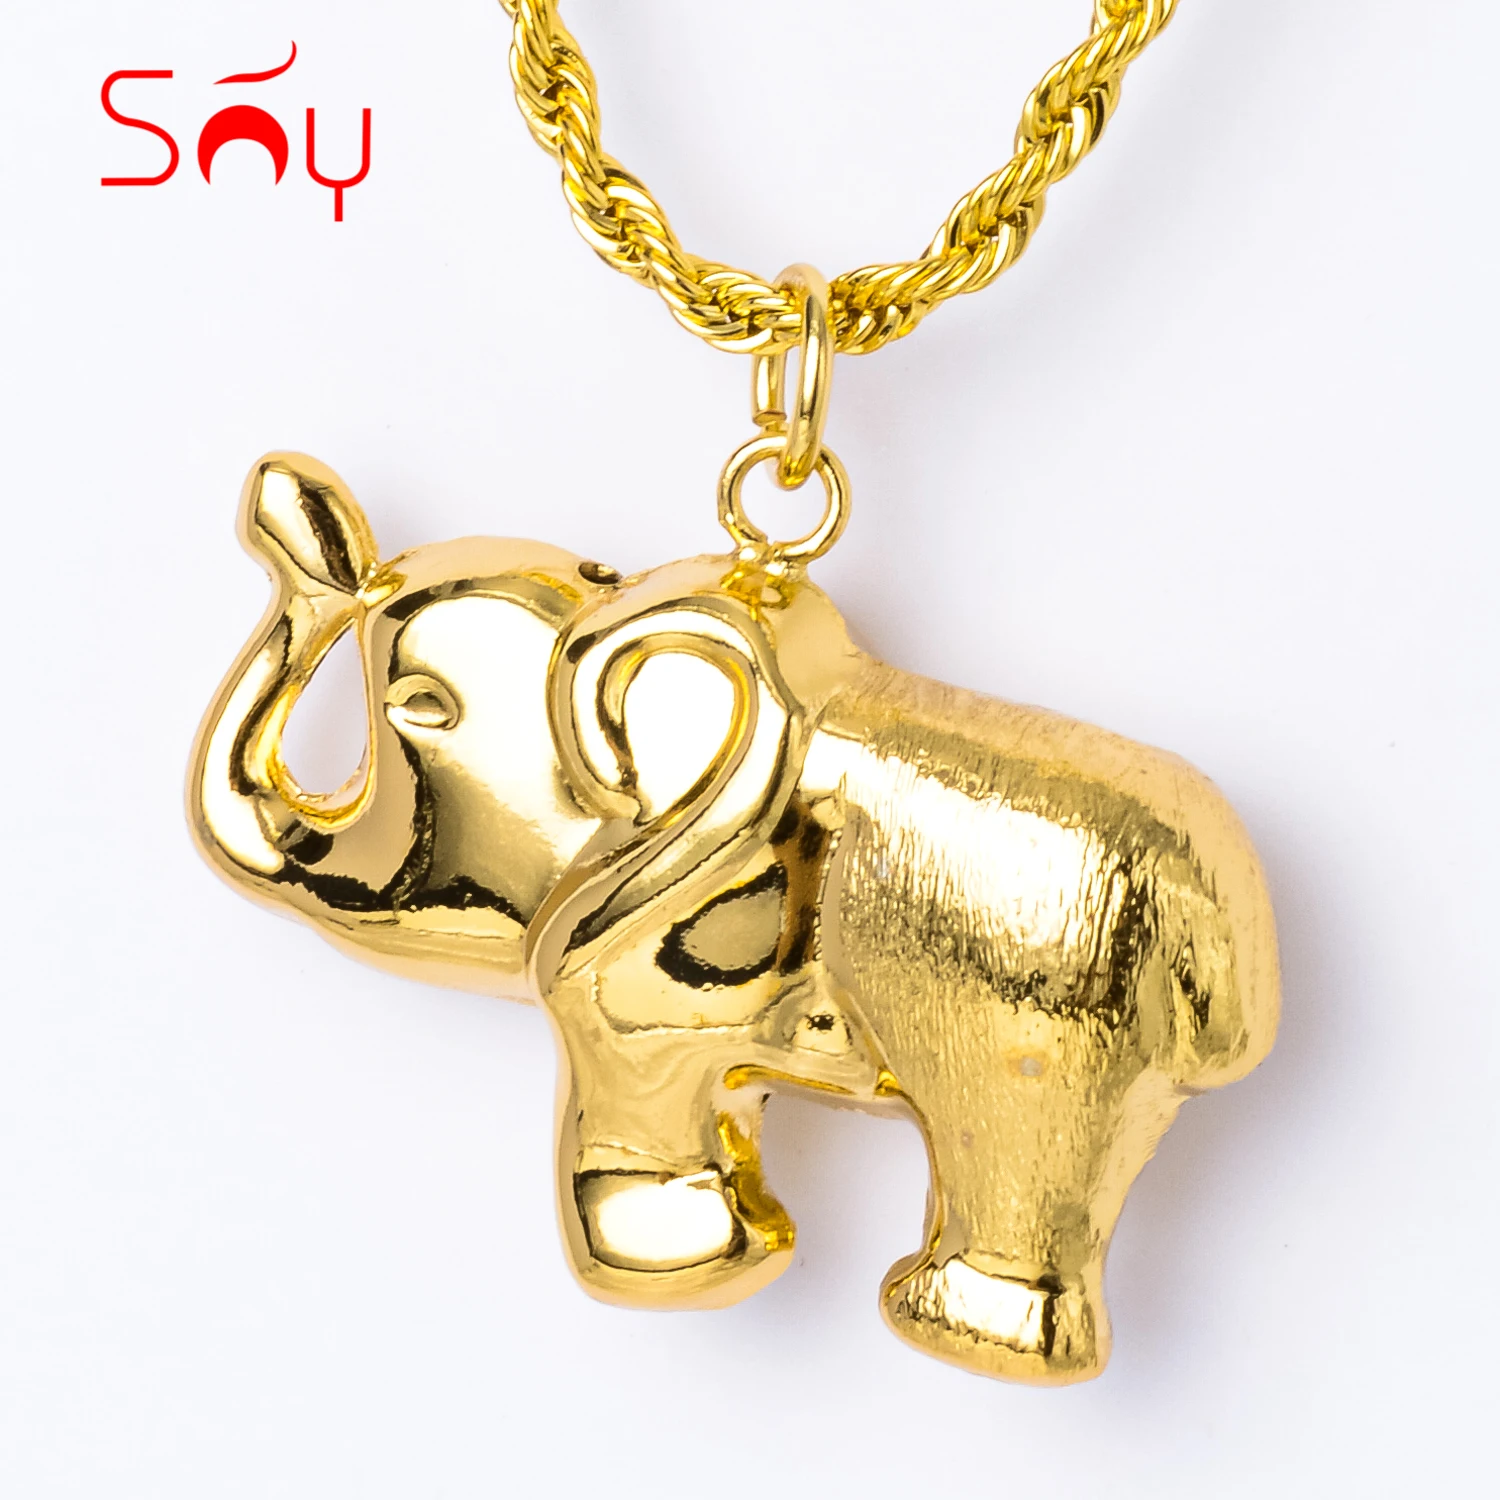 Sunny Jewelry Fashion Necklace/Collar Elephant Pendant Copper Hollow Animal Cute Style For Women Man High Quality Classic Gift